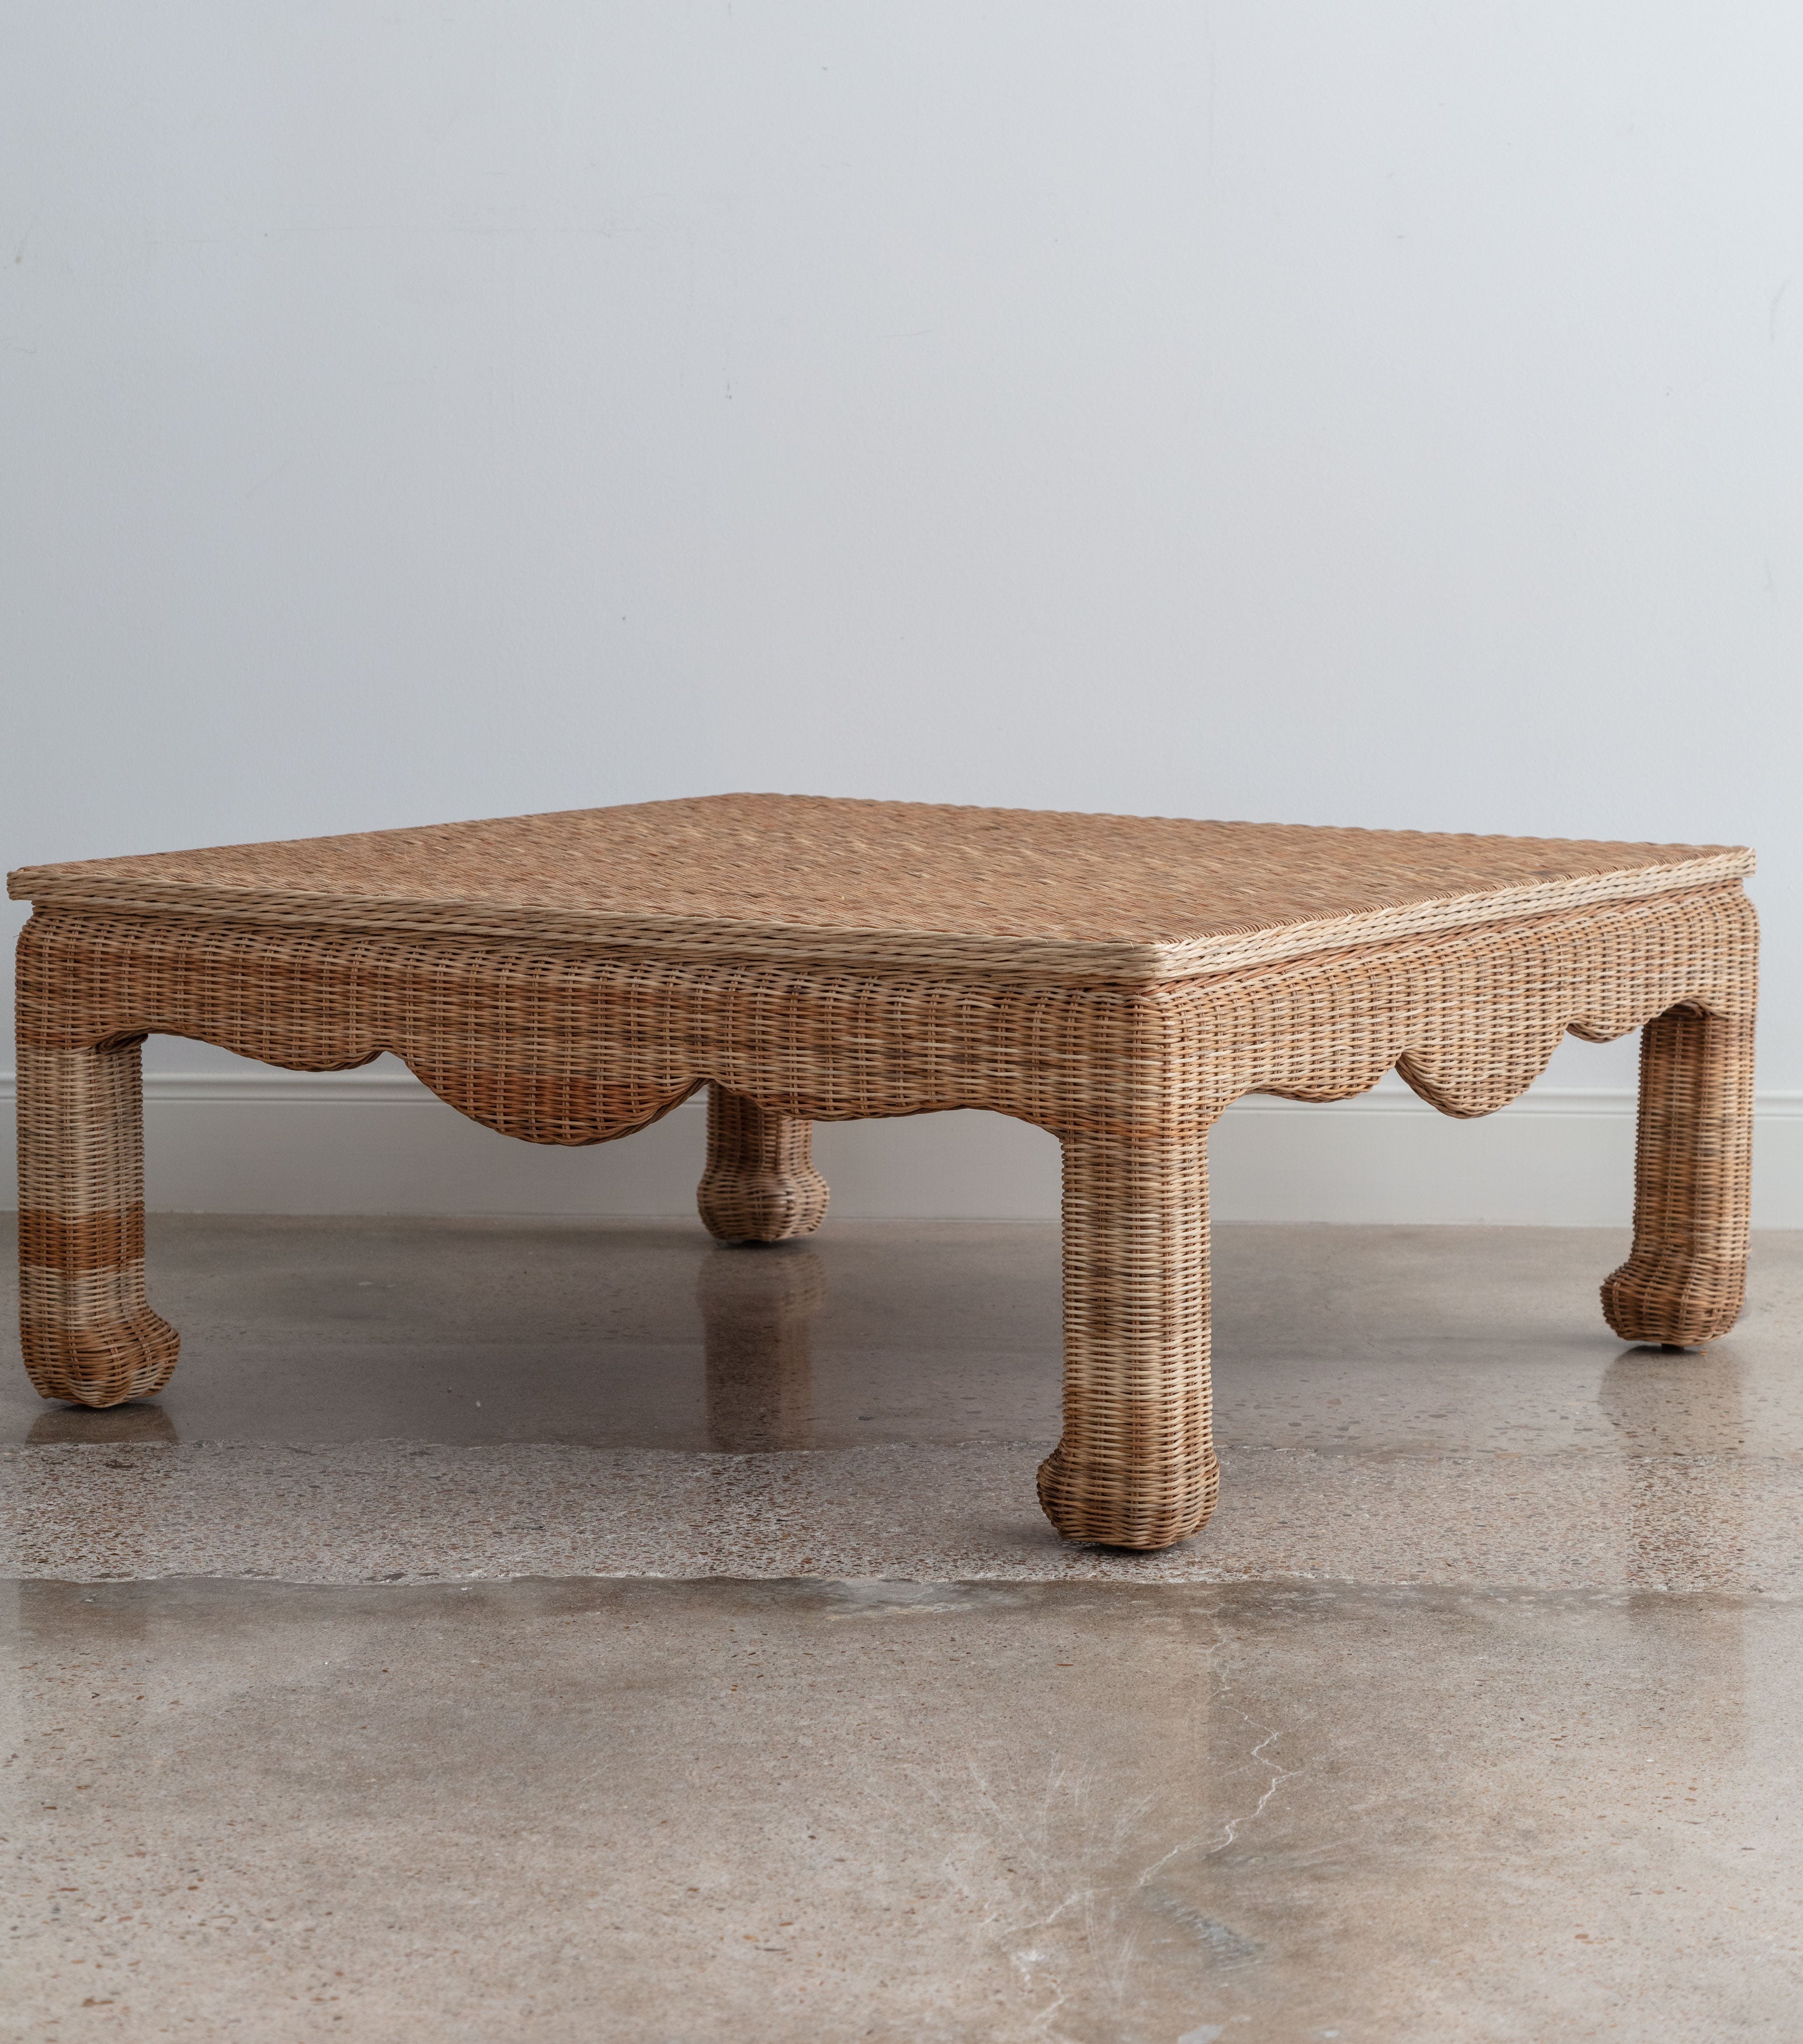 angled view of a wicker coffee table with curved feet and apron